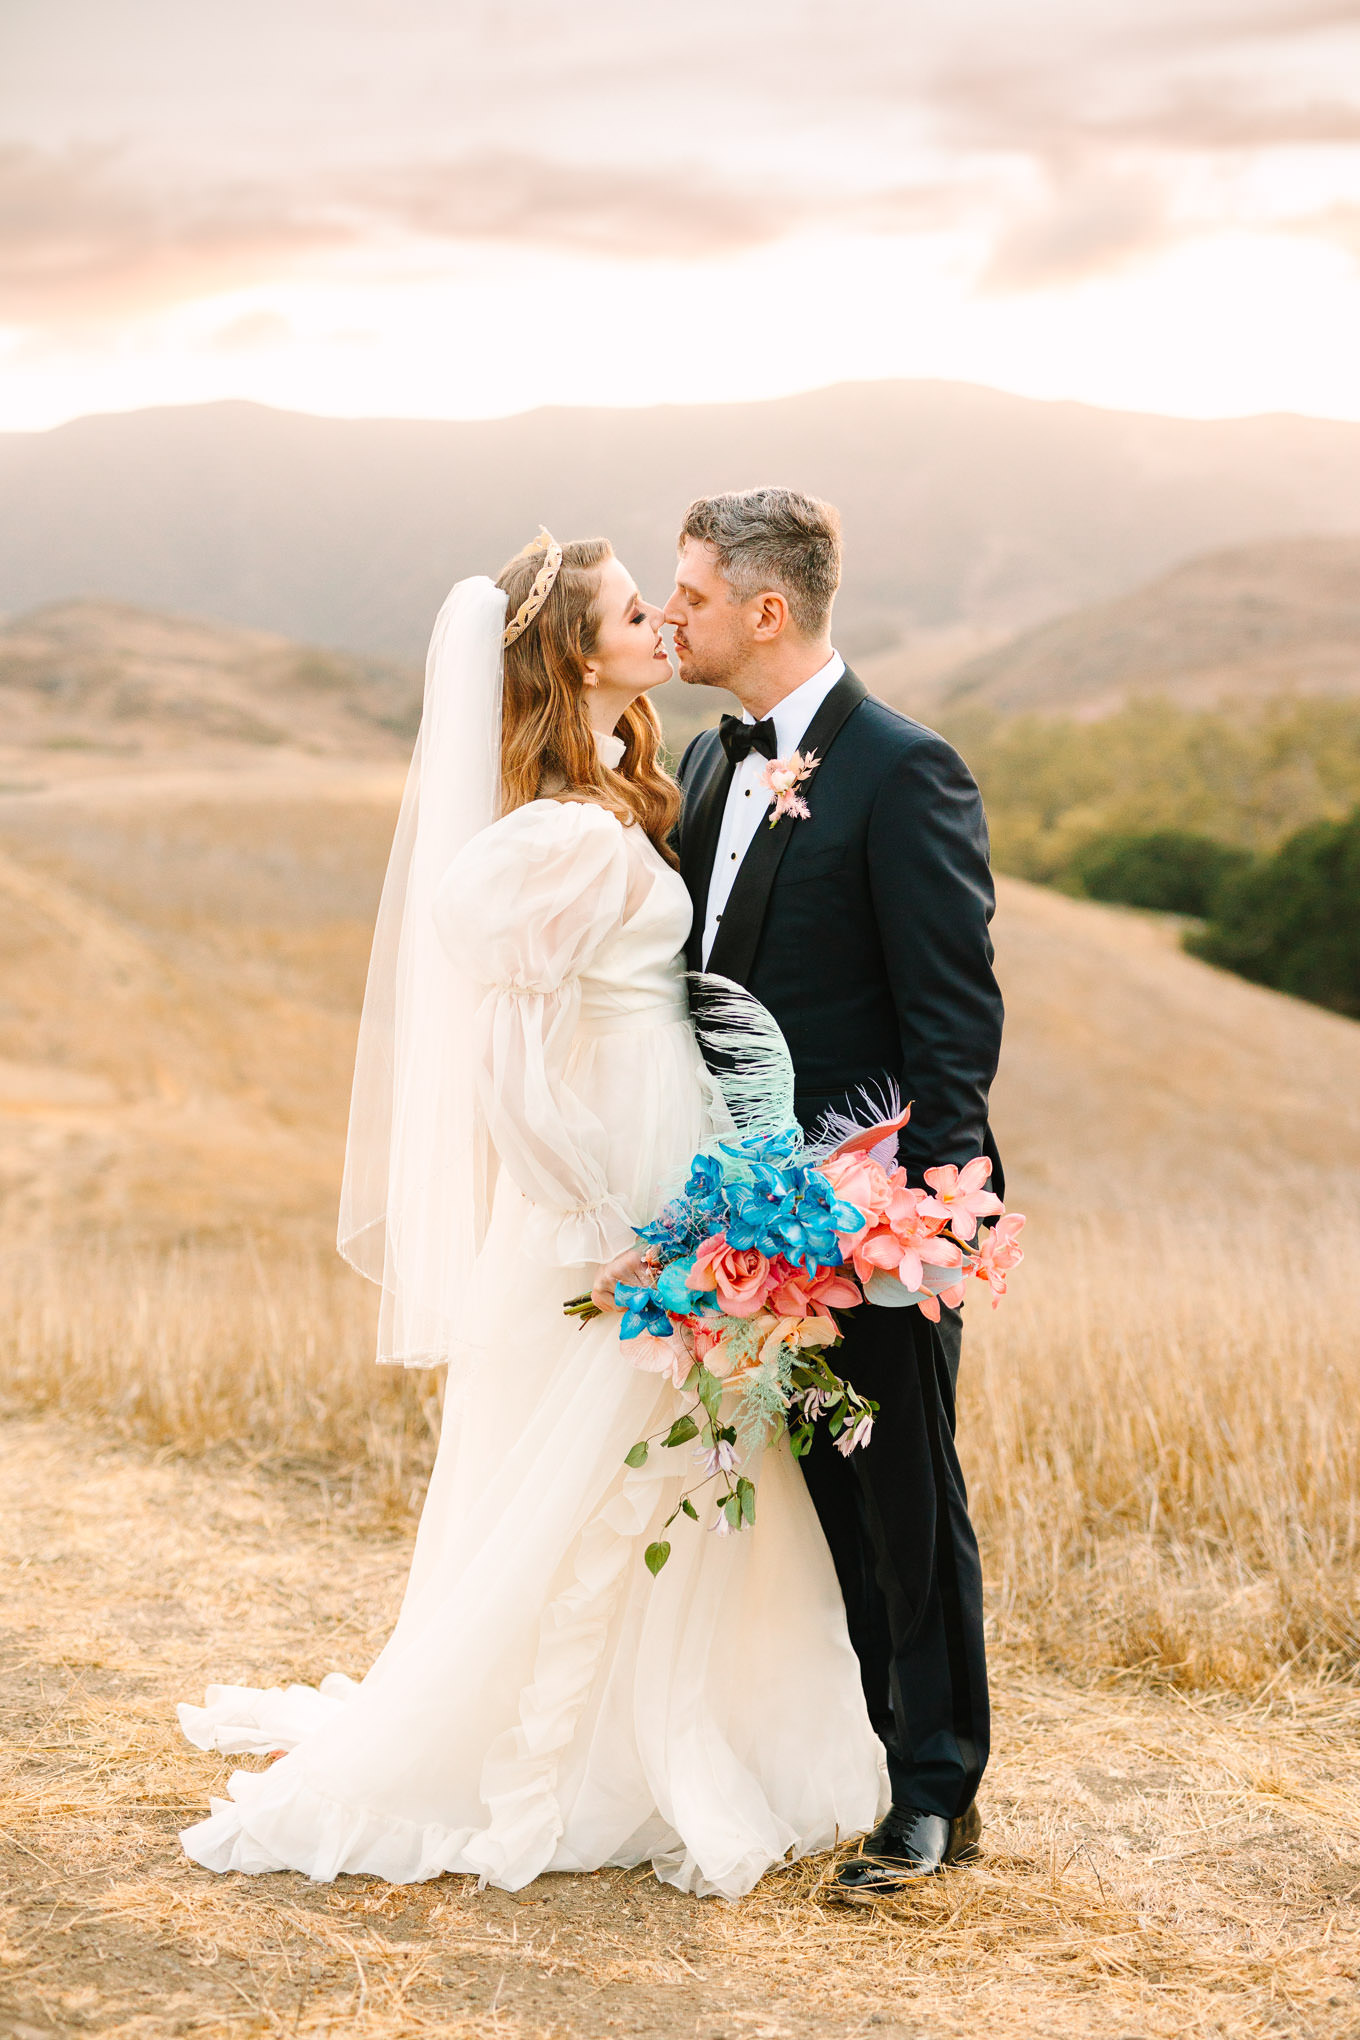 Bride and groom sunset wedding portraits | Allison Harvard’s colorful and quirky wedding at Higuera Ranch in San Luis Obispo | #sanluisobispowedding #californiawedding #higueraranch #madonnainn   
Source: Mary Costa Photography | Los Angeles